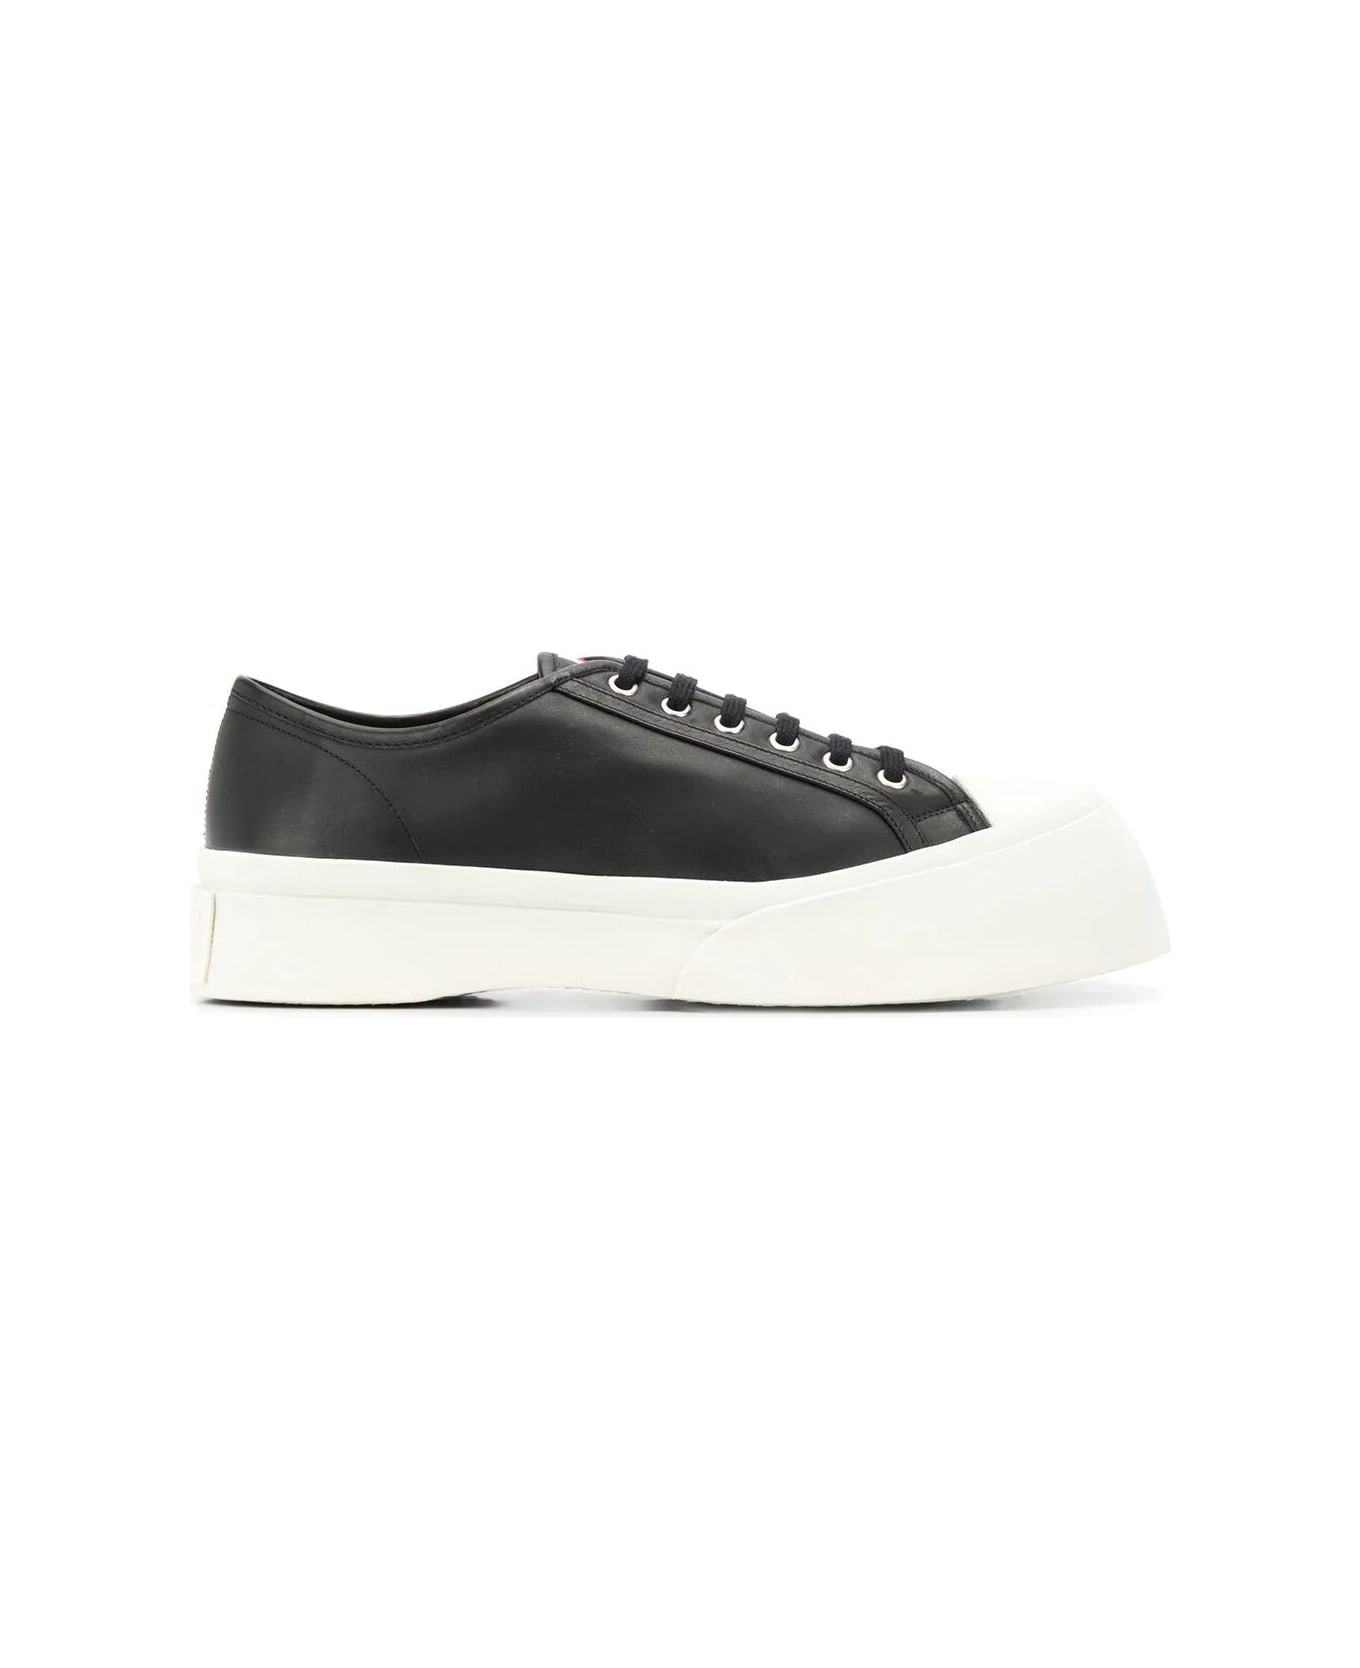 Marni Lace Up Sneakers - Black